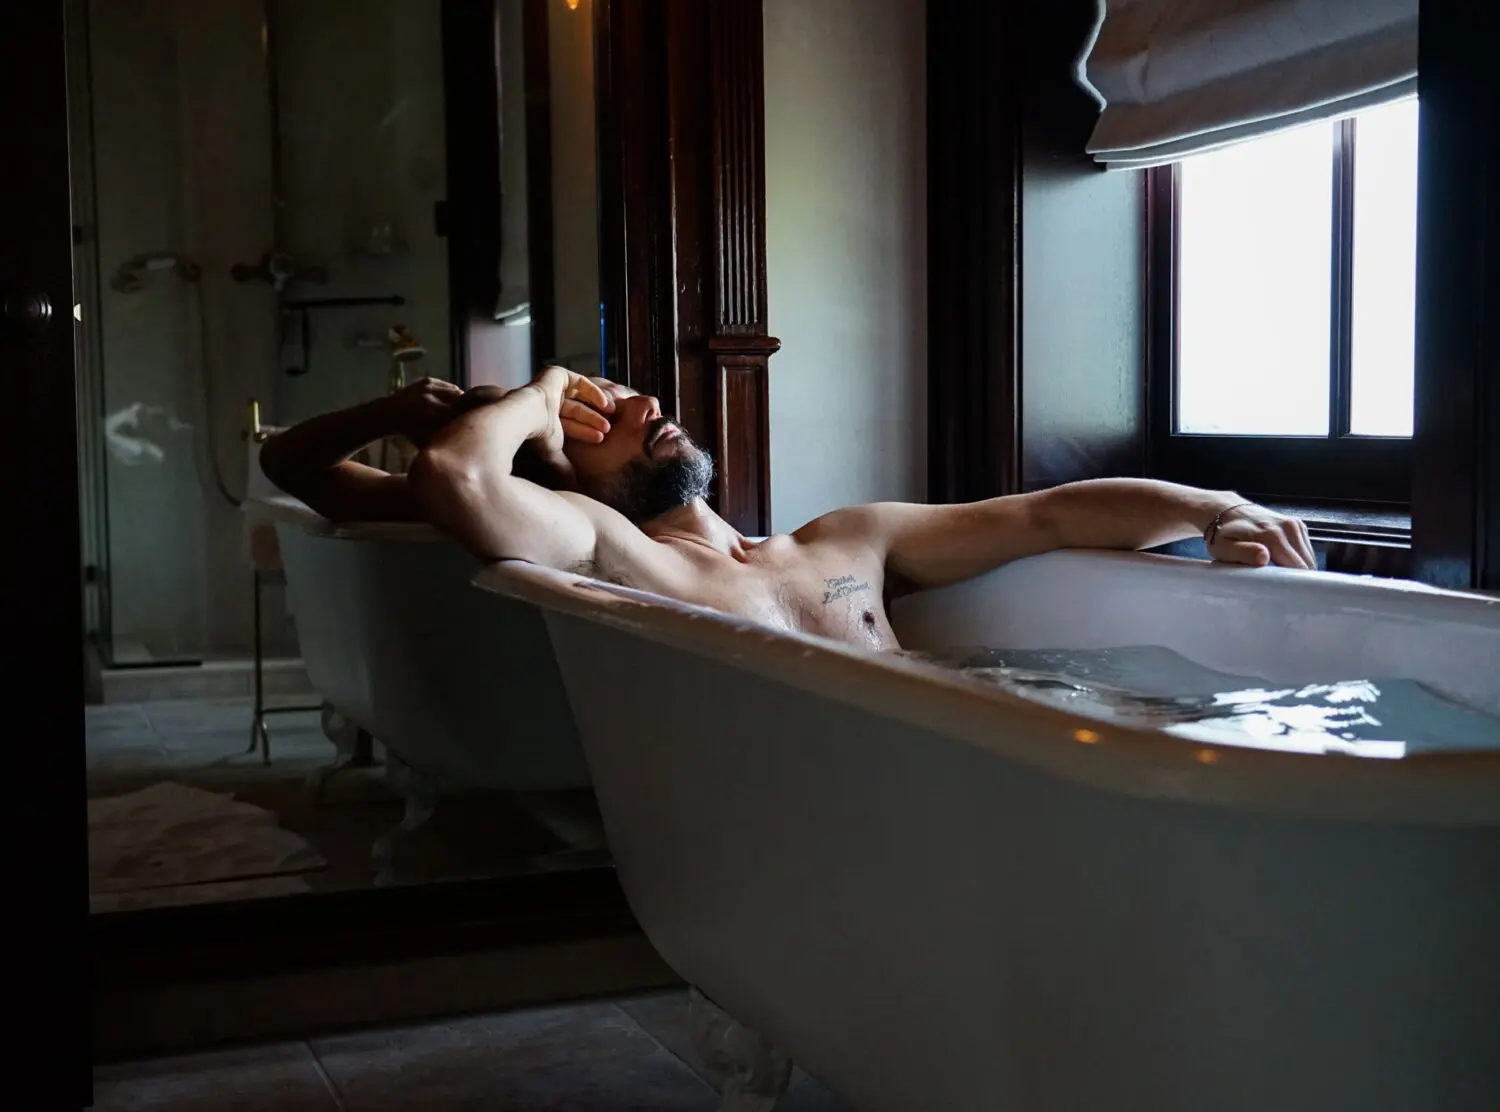 The Maker How to experience ultimate relaxation: a clawfoot tub and heated floors 